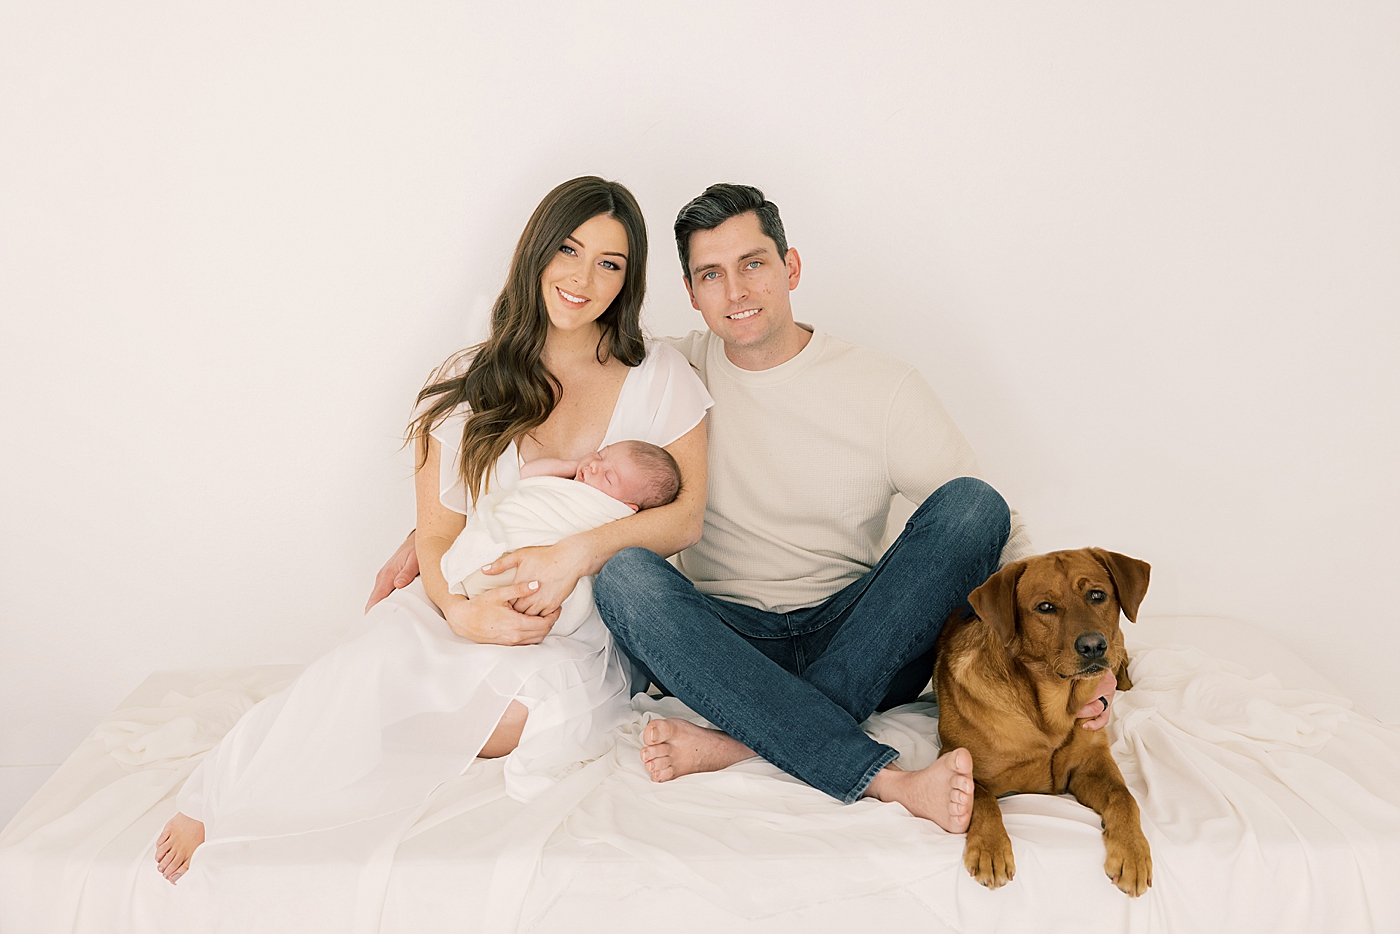 Mom and dad with their dog and new baby in the studio | Image by Halleigh Hill